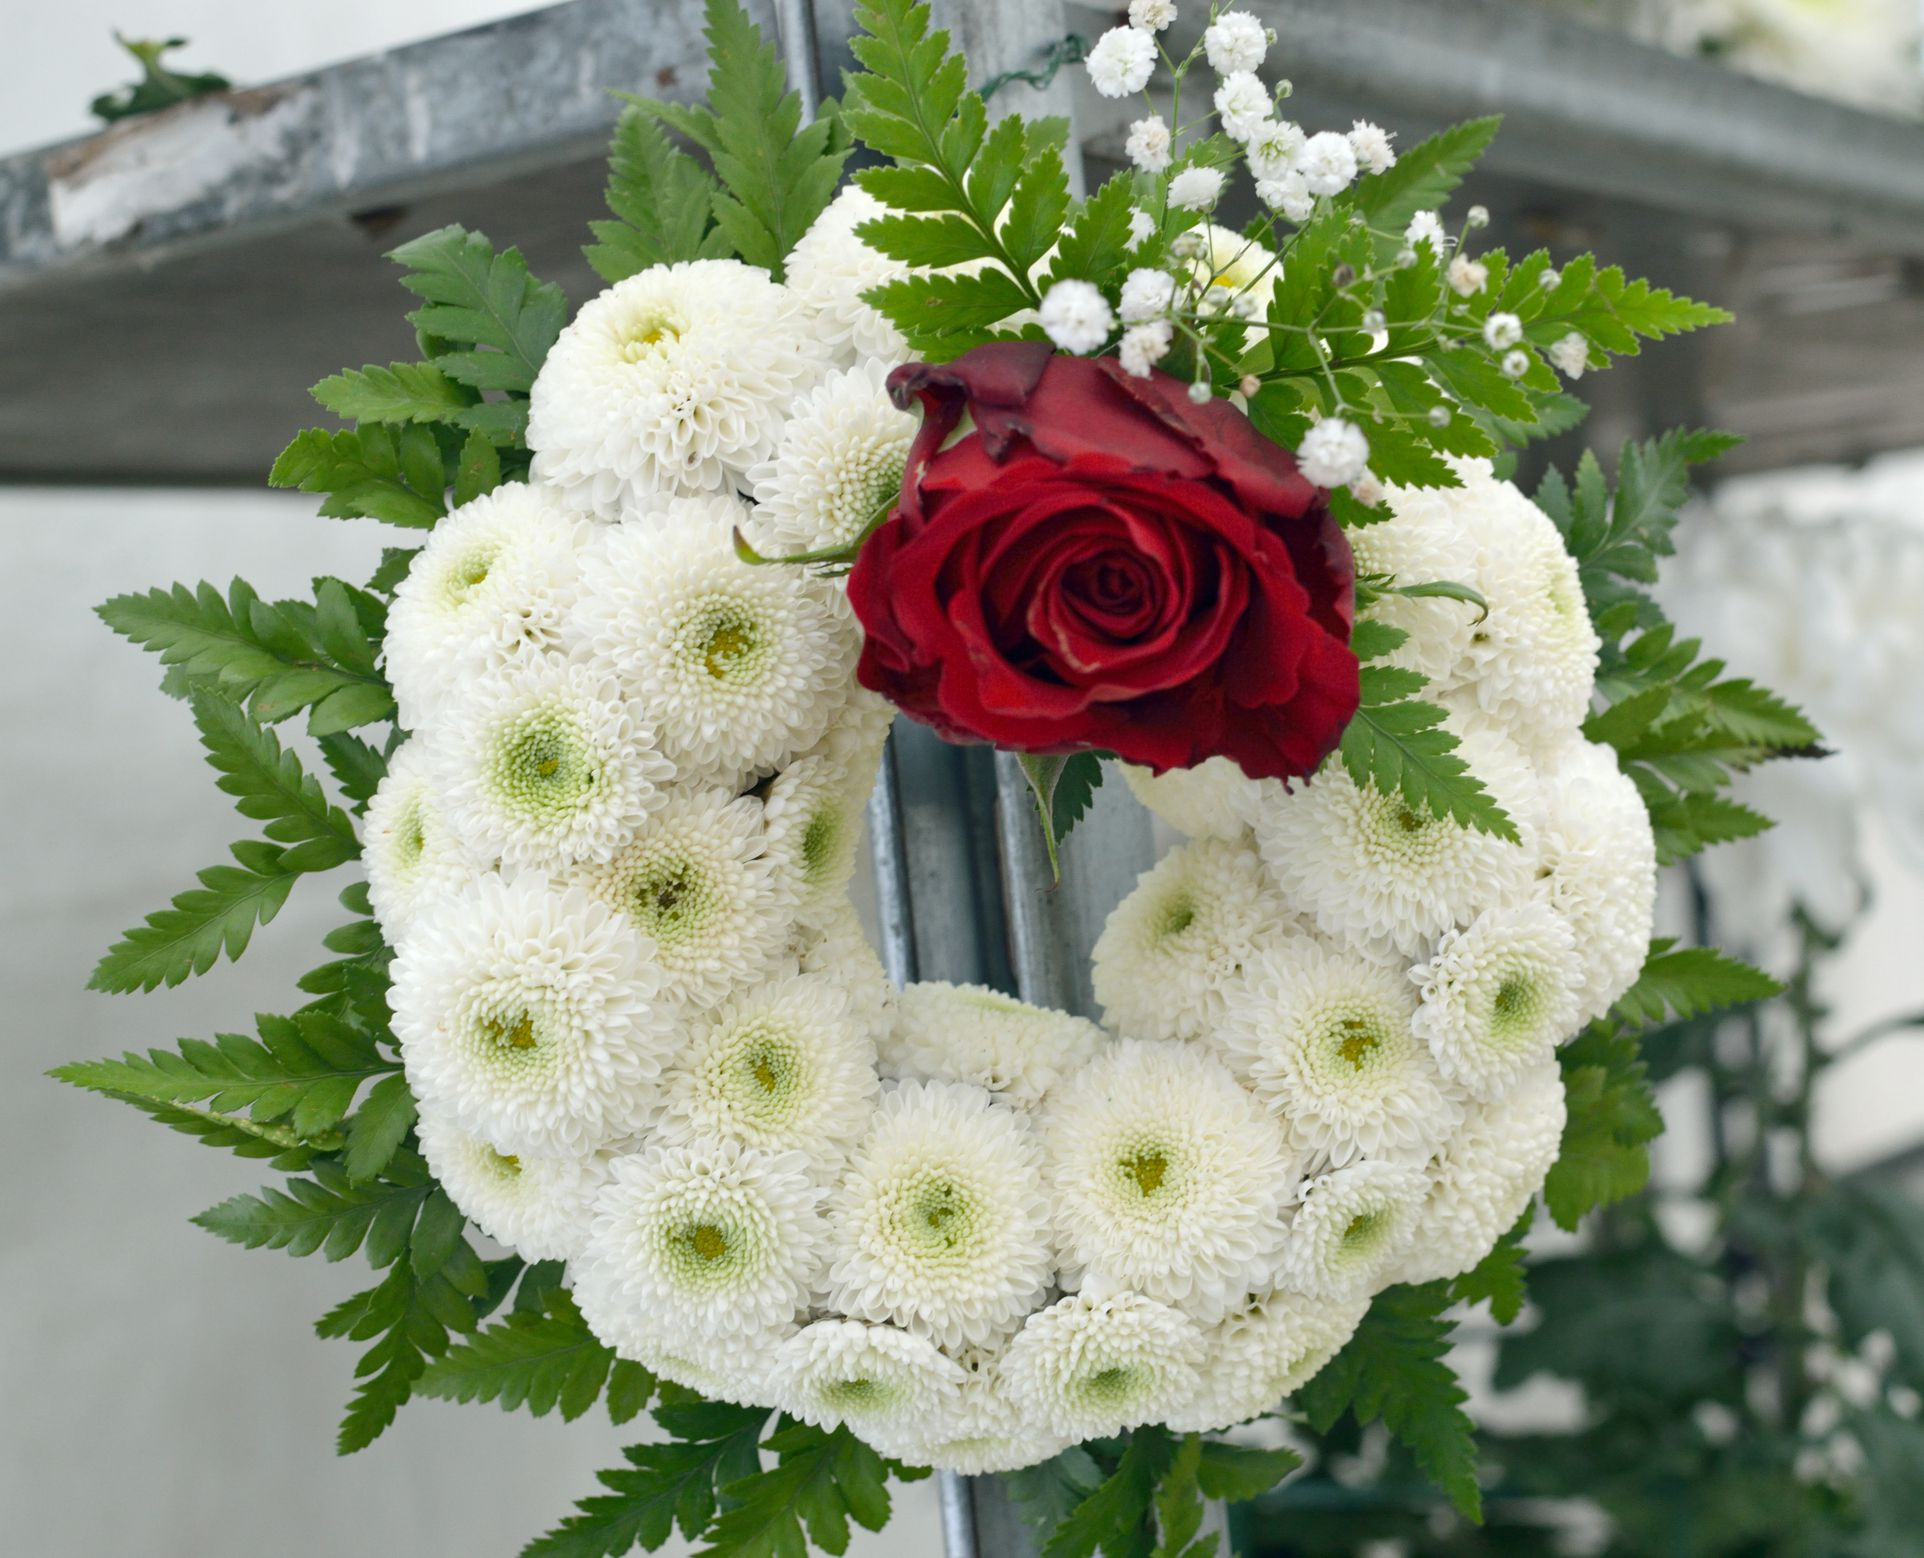 21 Nice Small Vase Flower Arrangements 2024 free download small vase flower arrangements of proper etiquette for sending funeral flowers for funeralwreath gettyimages 591655301 5a3edccc5b6e240037ffc773